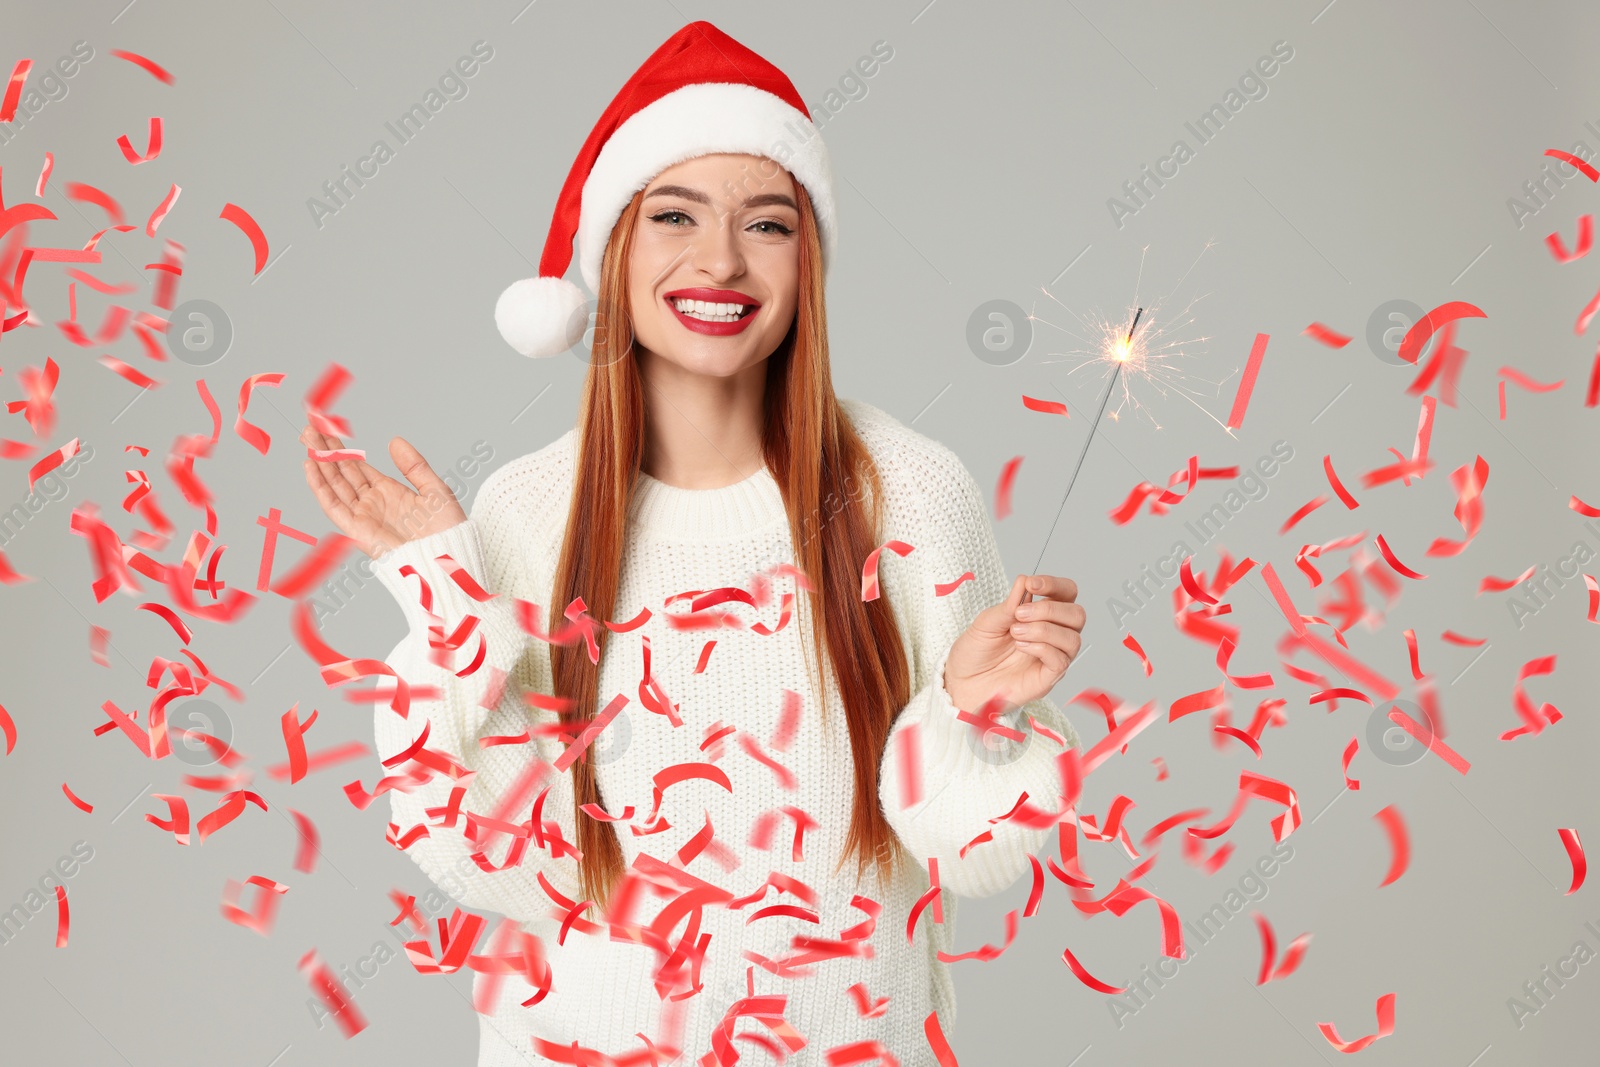 Image of Happy woman in Santa hat with sparkler on grey background. Red confetti flying near her